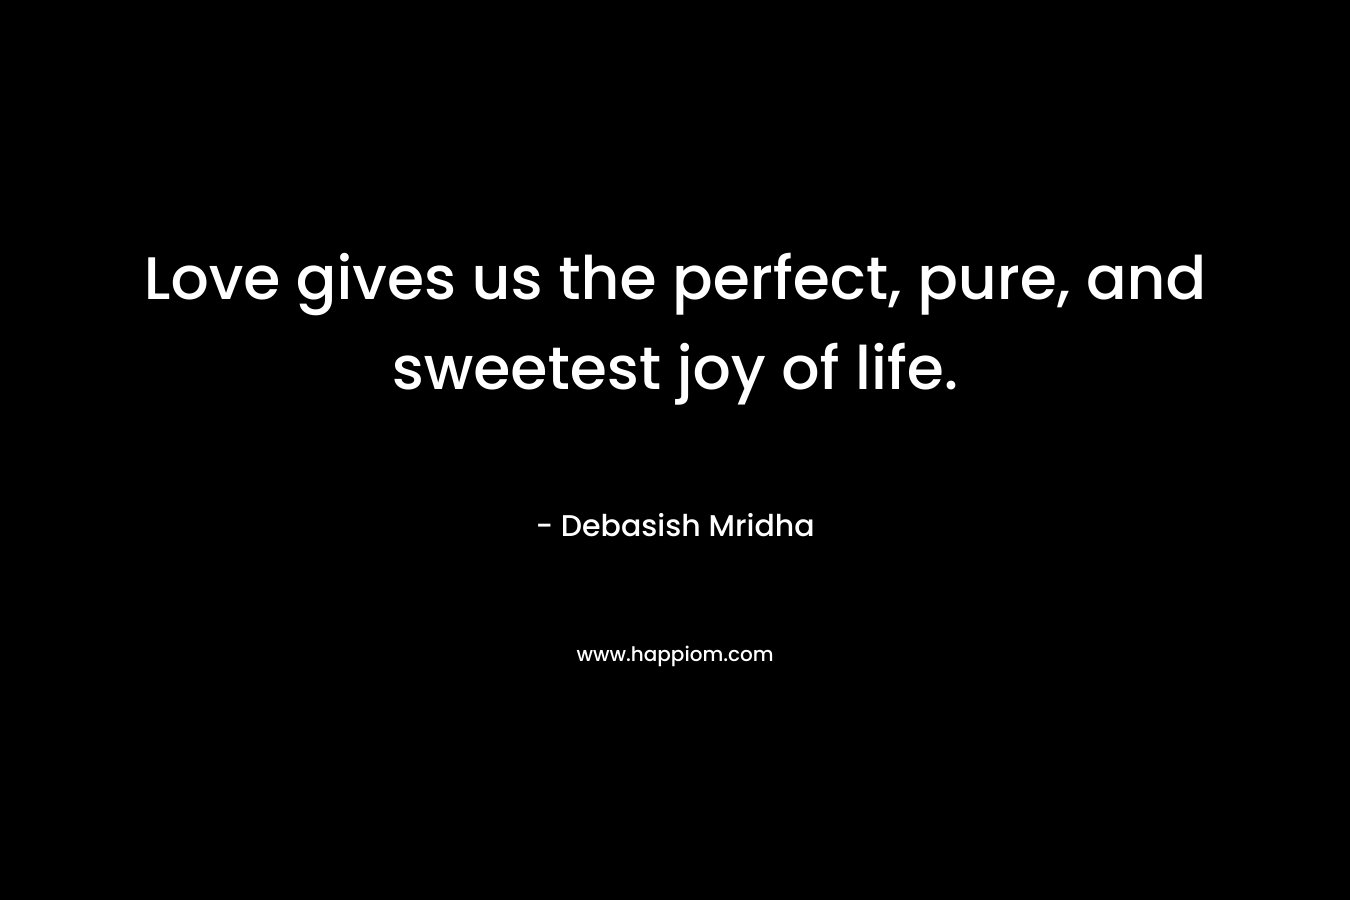 Love gives us the perfect, pure, and sweetest joy of life.